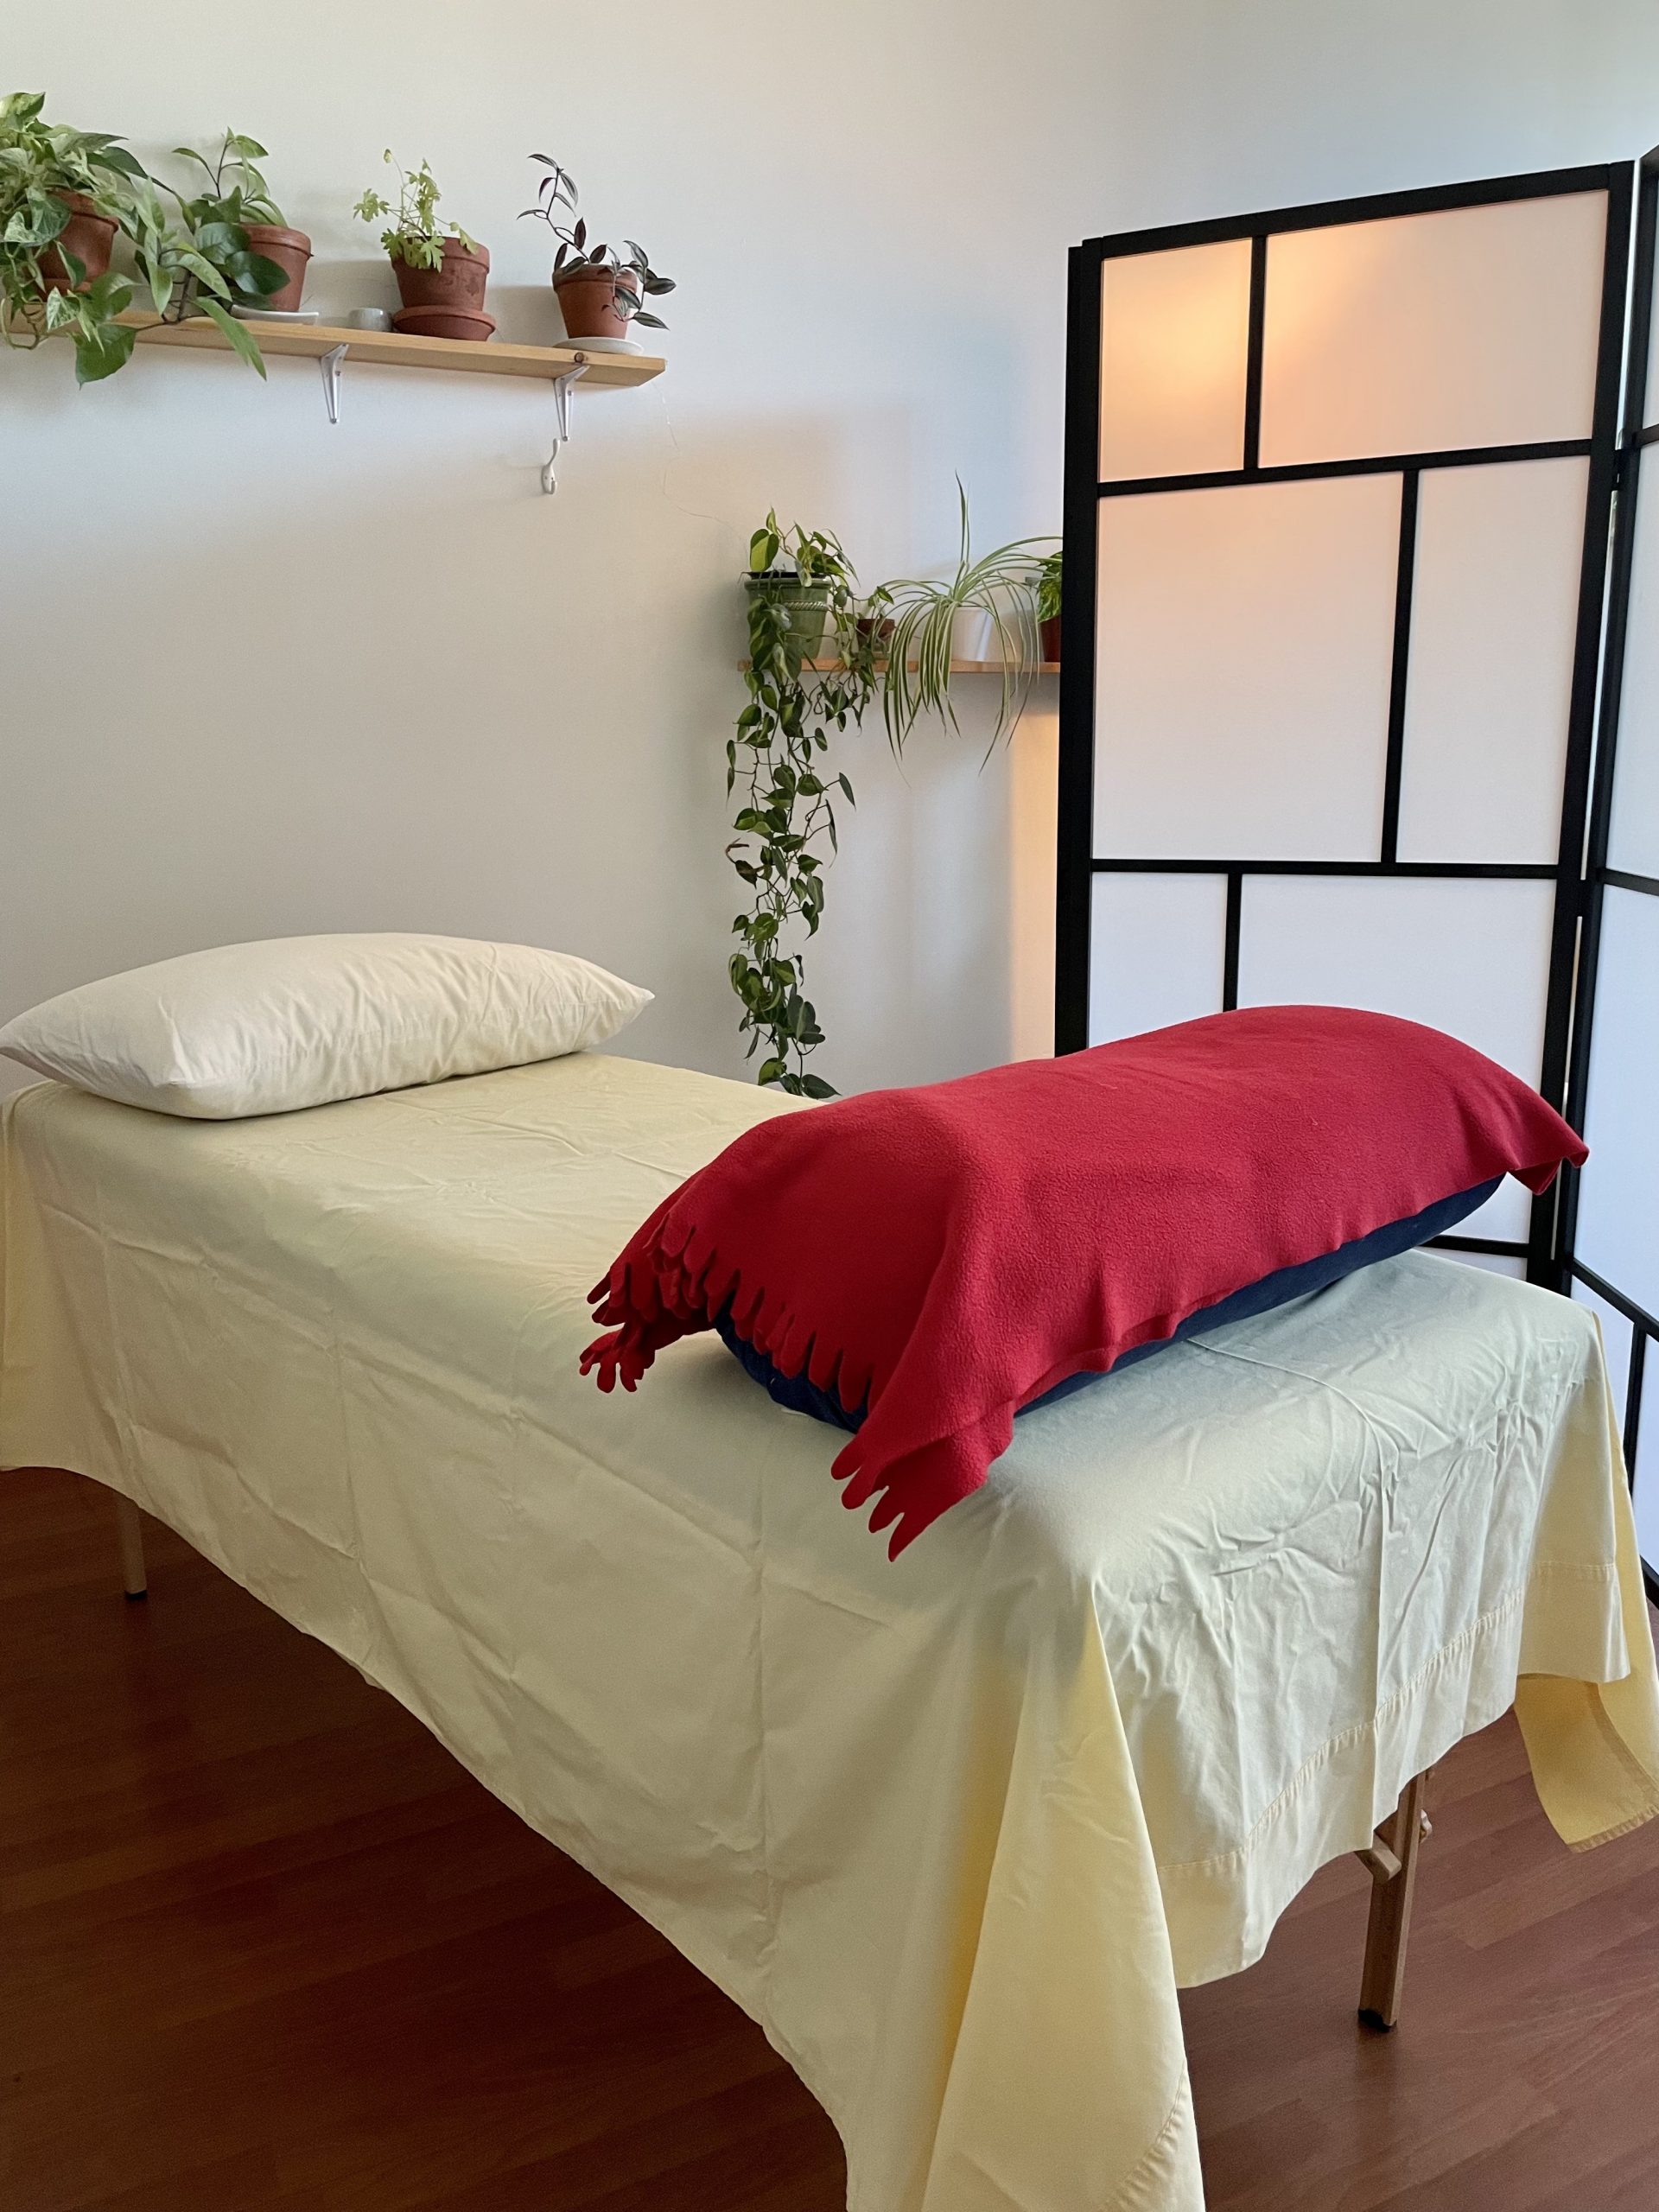 Massage table draped in a yellow sheet with a white pillow on the far end and a red bolster on the far end. View is on an angle. White and black screens are visible in the background, as well as some potted plants on shelves.